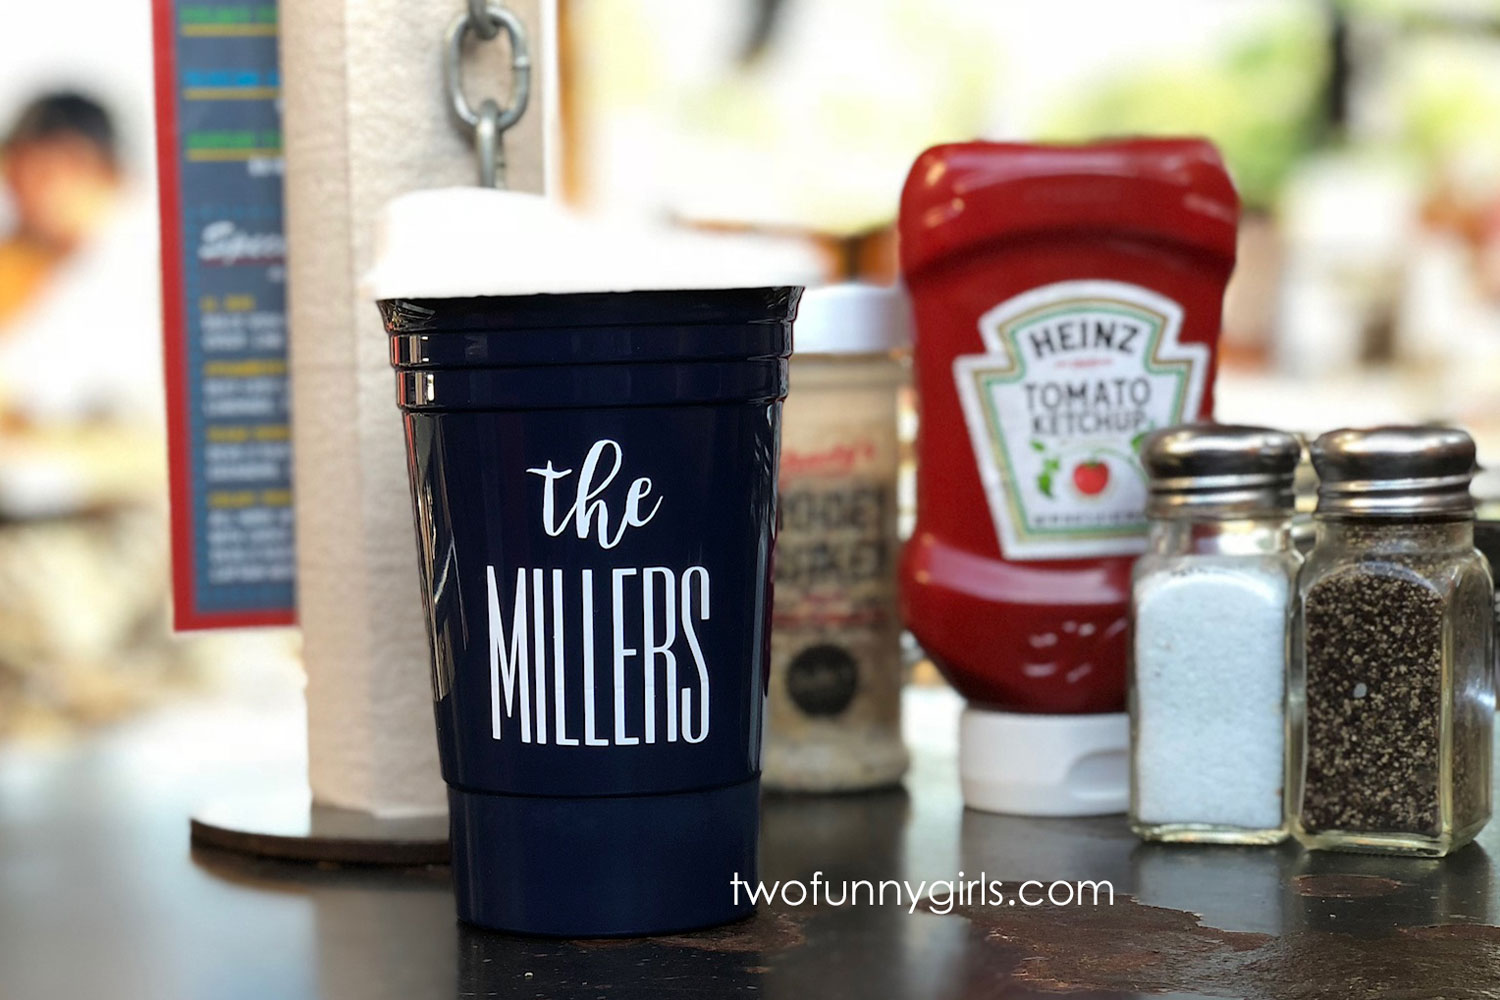 Personalized Solo Cup - Red